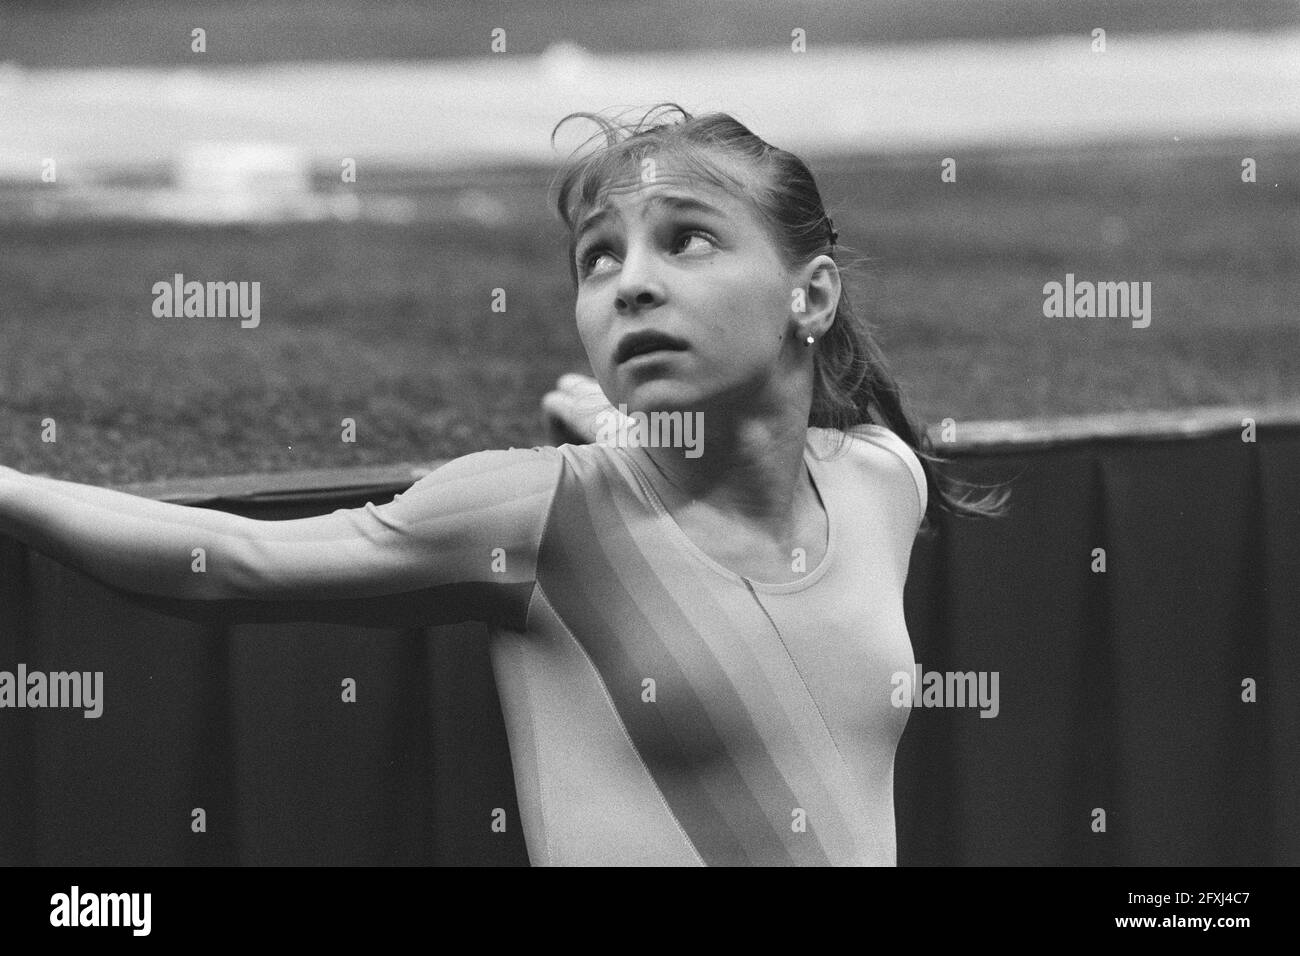 World Championships gymnastics in Rotterdam beginning 19/10; Romanian Daniela Silivas during training, October 15, 1987, TURN, The Netherlands, 20th century press agency photo, news to remember, documentary, historic photography 1945-1990, visual stories, human history of the Twentieth Century, capturing moments in time Stock Photo